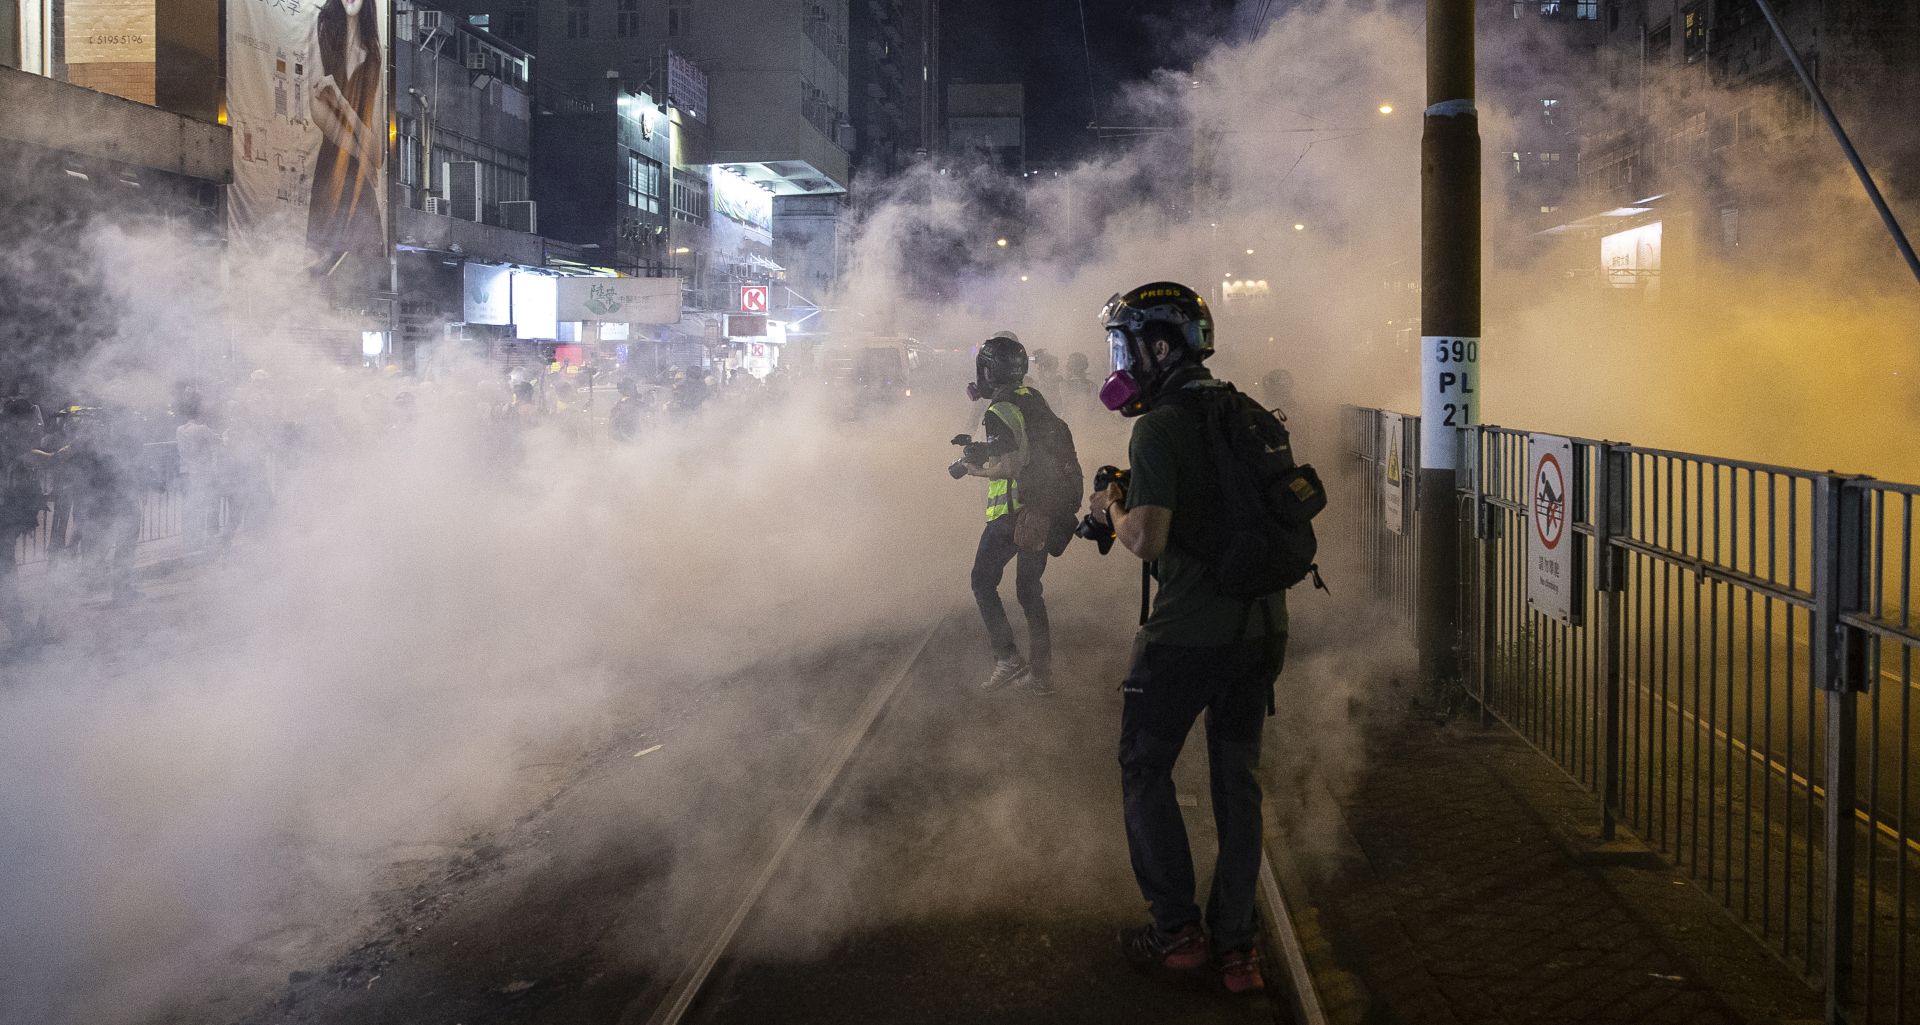 epa07859773 Members of the media photograph tear gas fired by riot police to disperse protesters in Yuen Long district, Hong Kong, China, 21 September 2019. Hong Kong has entered its fourth month of mass protests, originally triggered by a now suspended extradition bill to mainland China that have turned into a wider pro-democracy movement.  EPA/CHAN LONG HEI